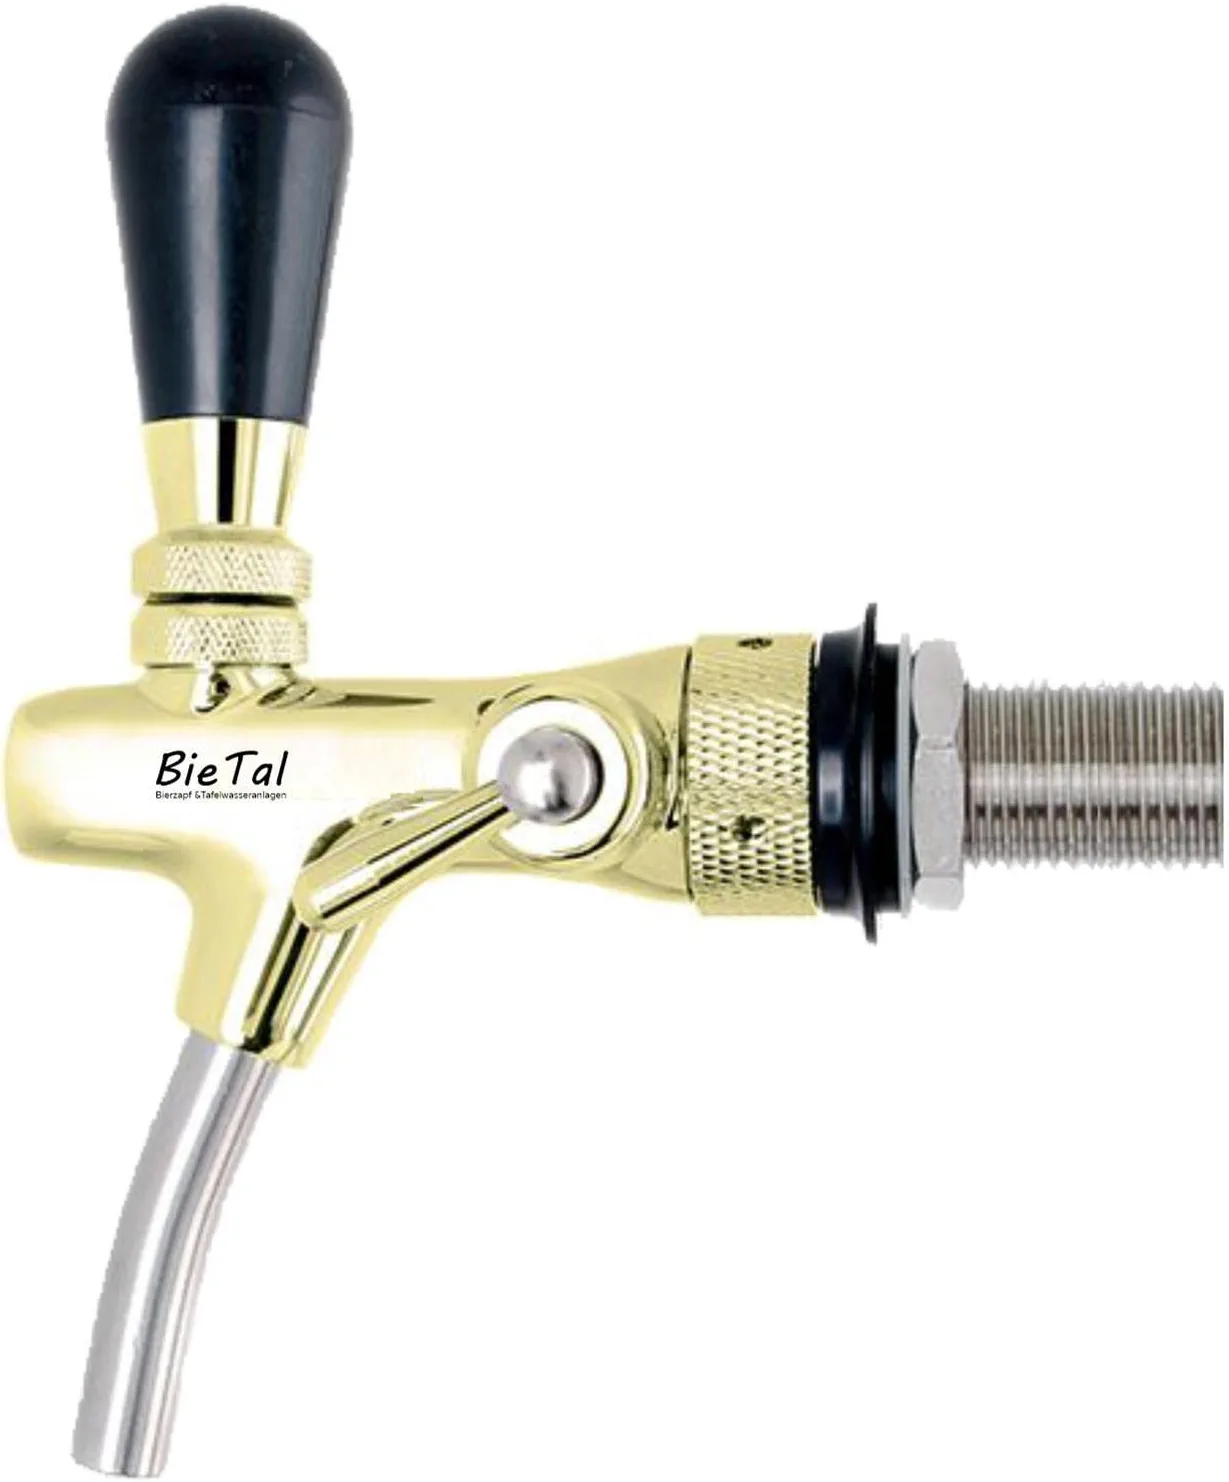 BieTal® Compensator tap, tap adjustable beer tap with foam button, gold-plated, 55 mm